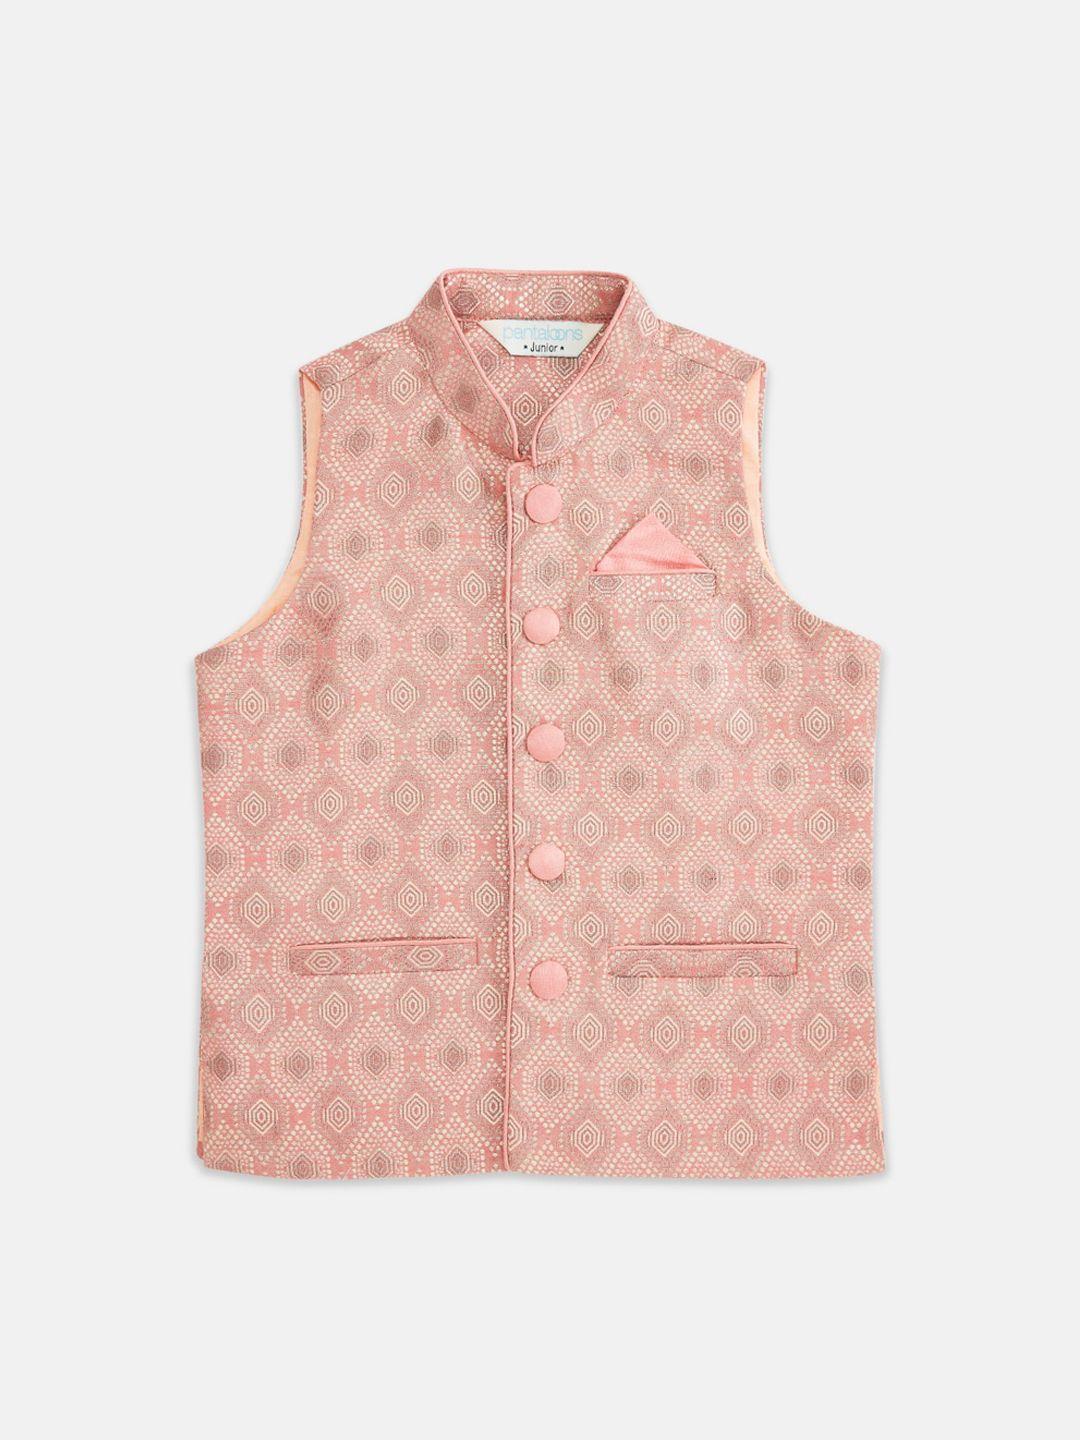 indus route by pantaloons boys pink & off-white woven design waistcoat